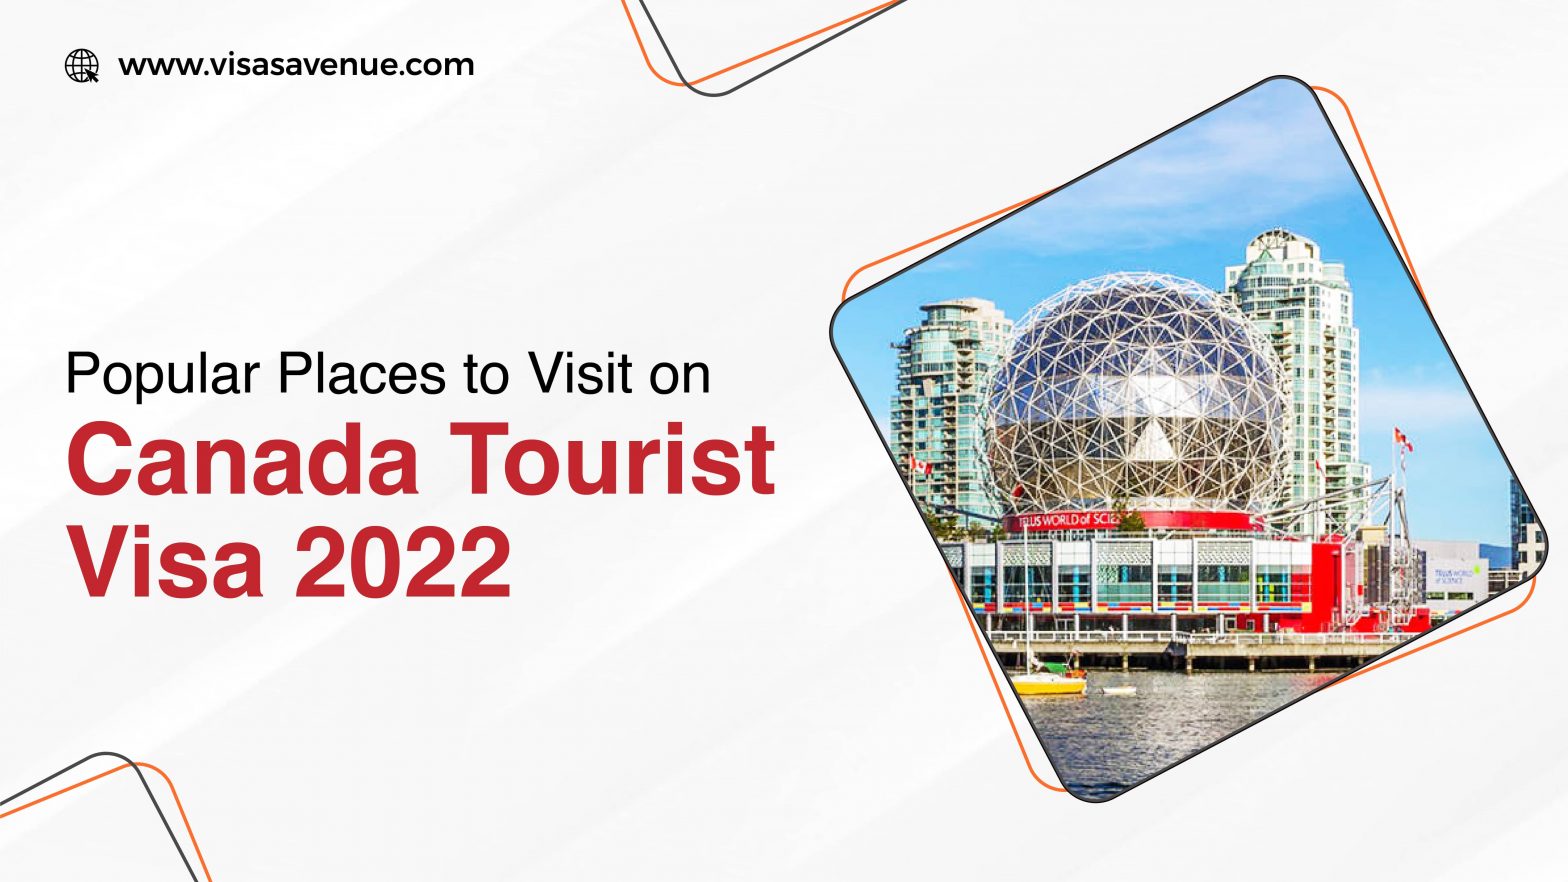 Popular Places to Visit on Canada Tourist Visa